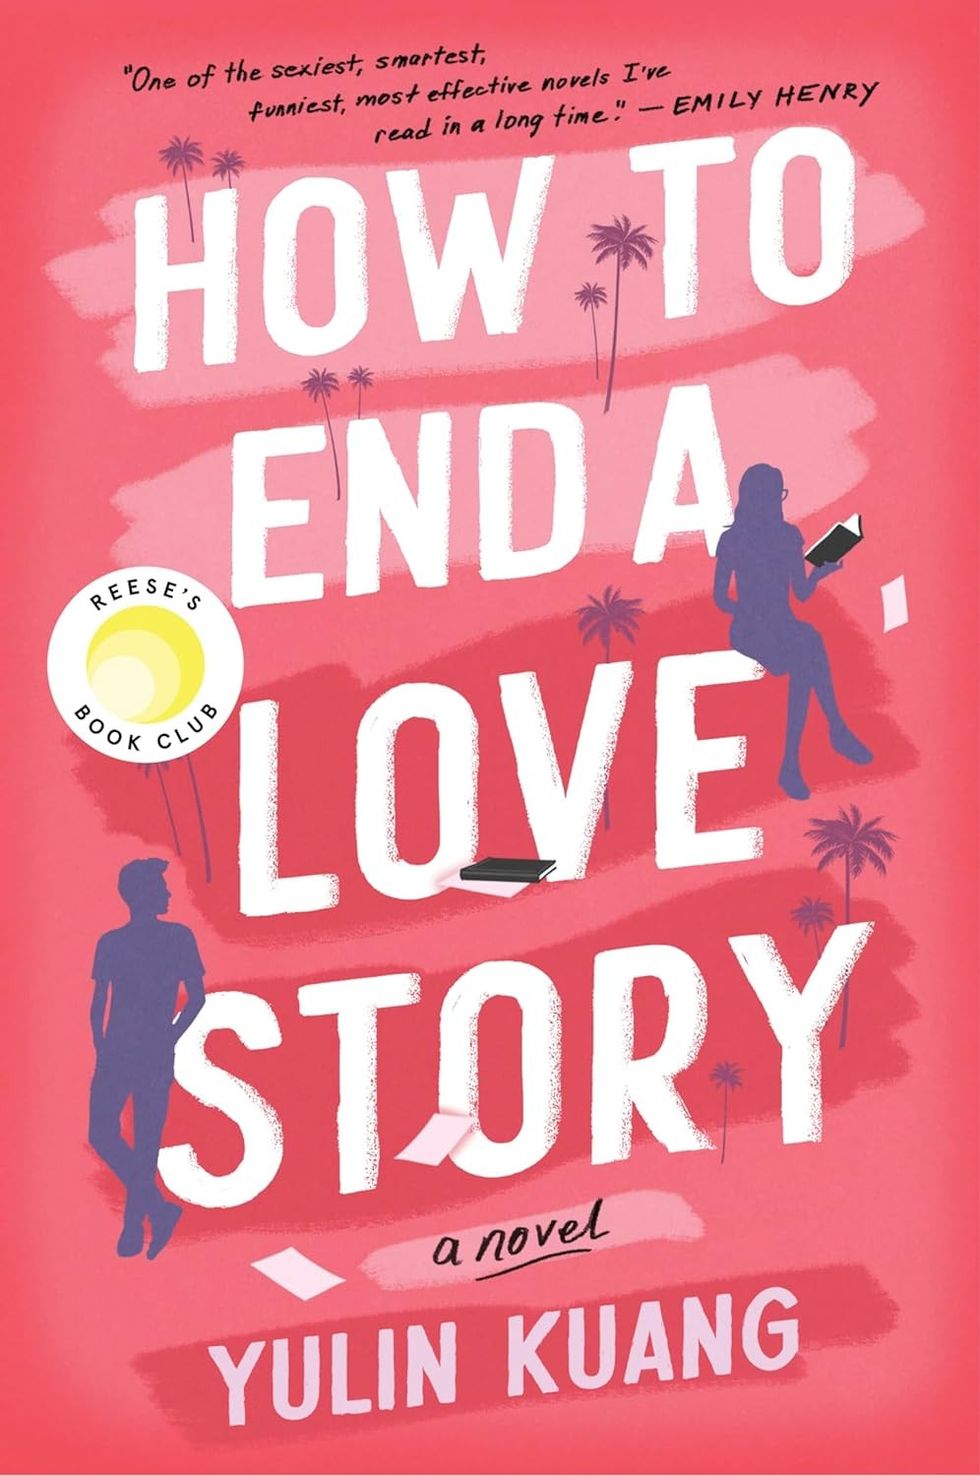 "How to End a Love Story"